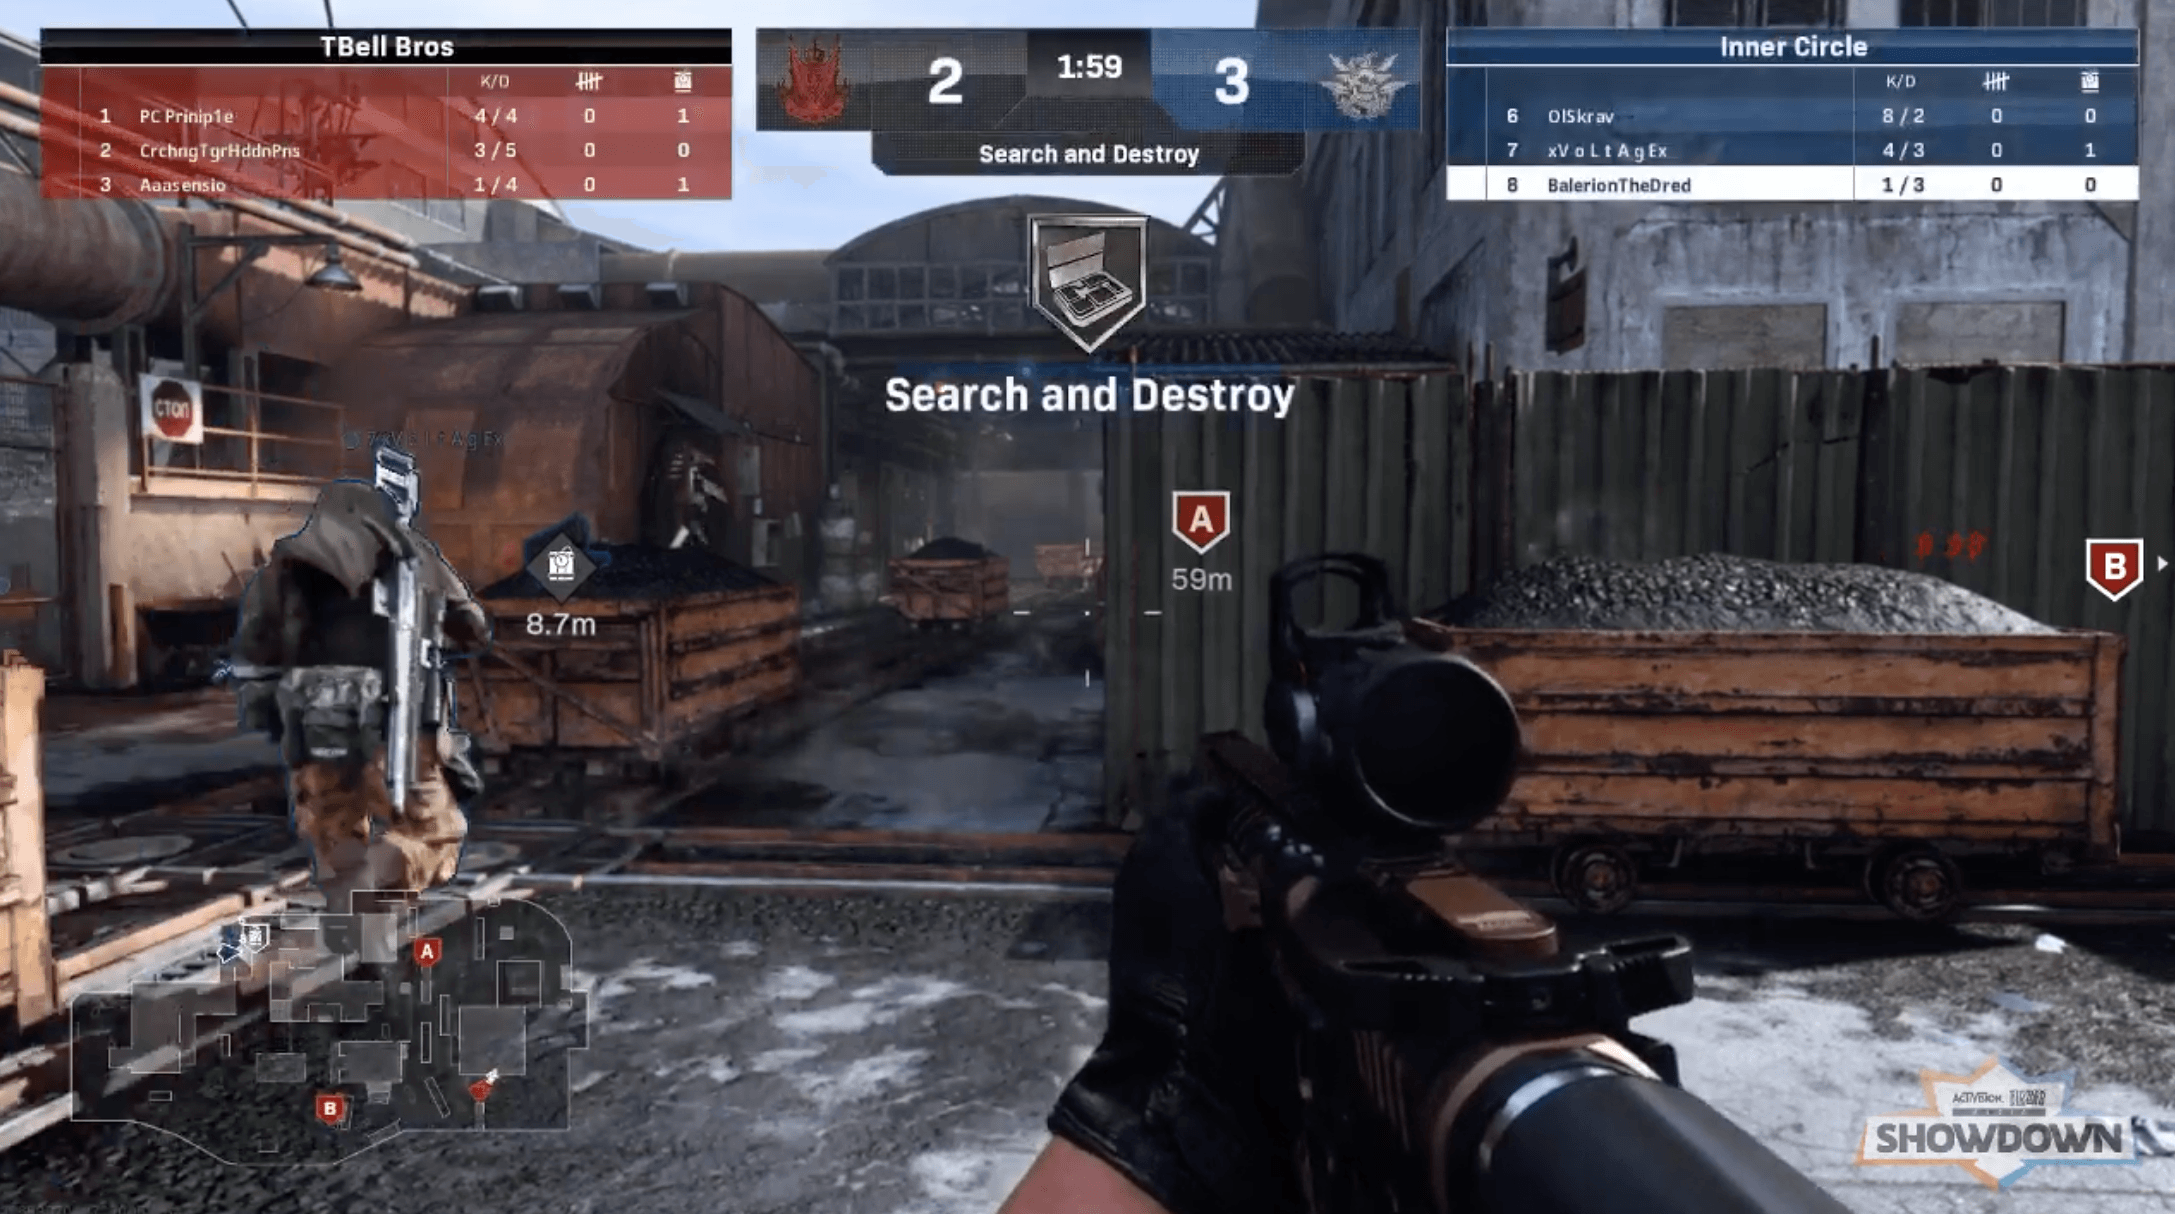 Activision highlights accessibility features in Call of Duty